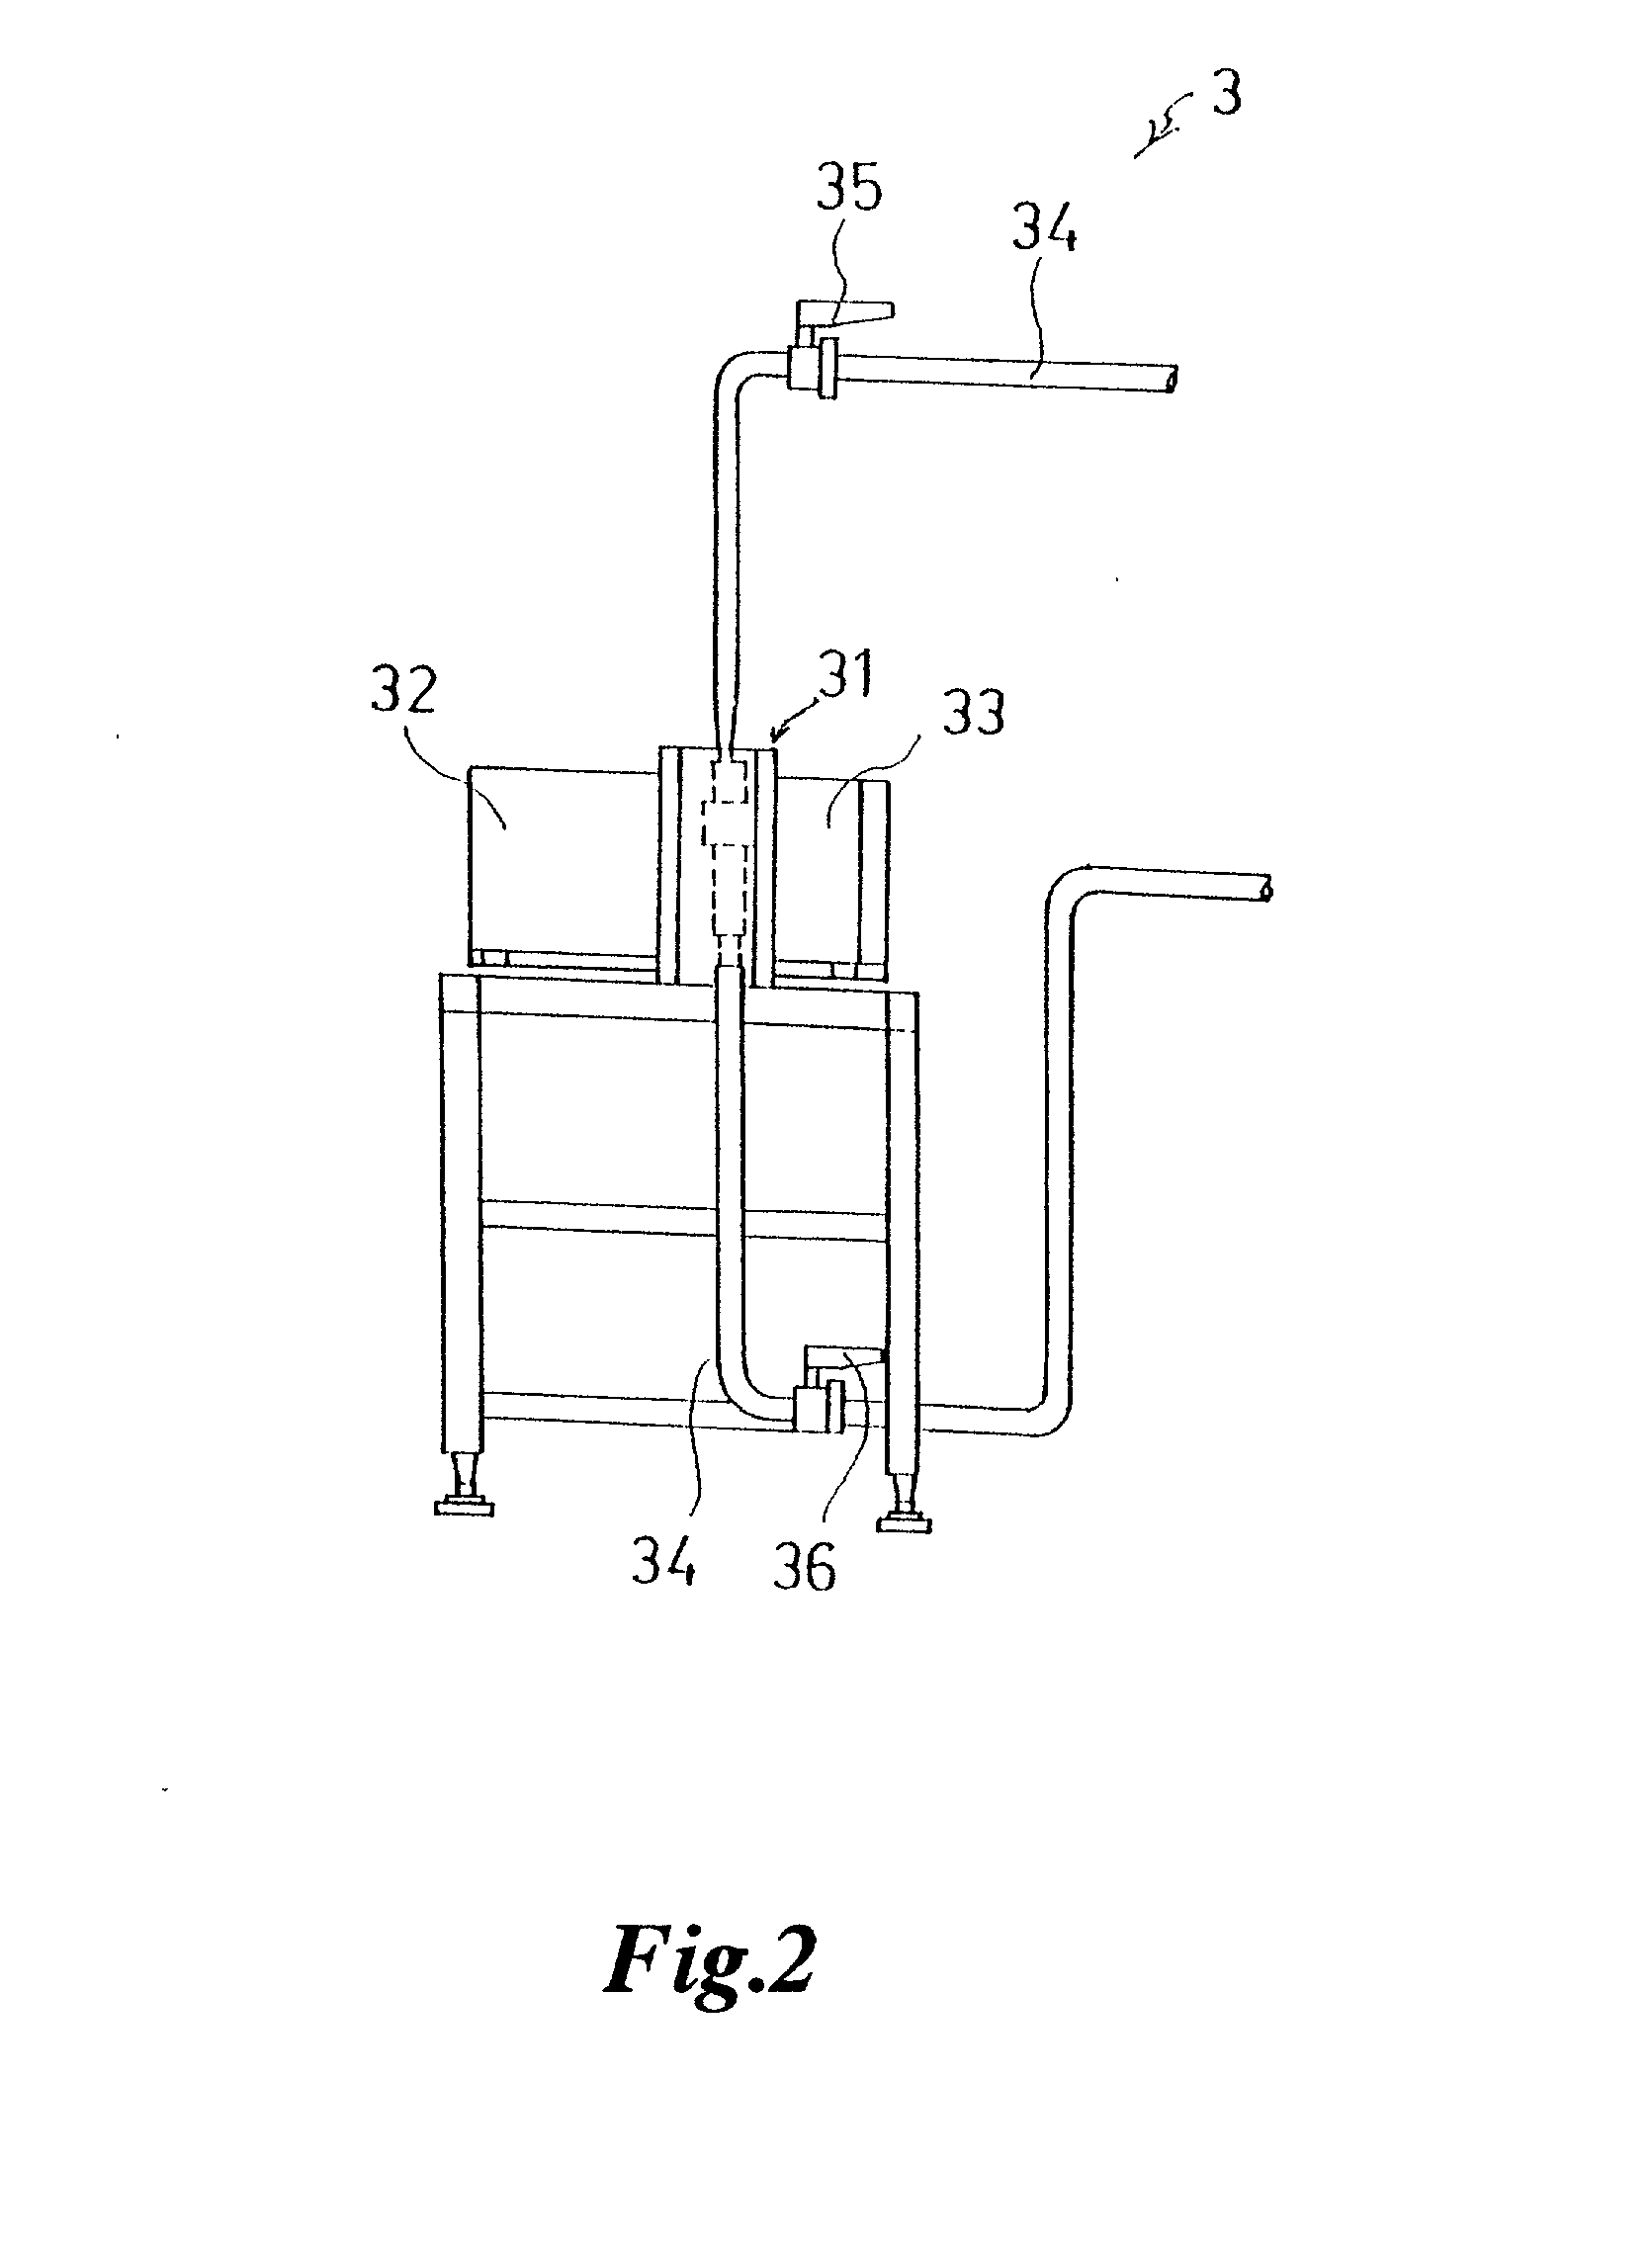 Production method for granulated materials by controlling particle size distribution using diffracted and scattered light from particles under granulation and system to execute the method